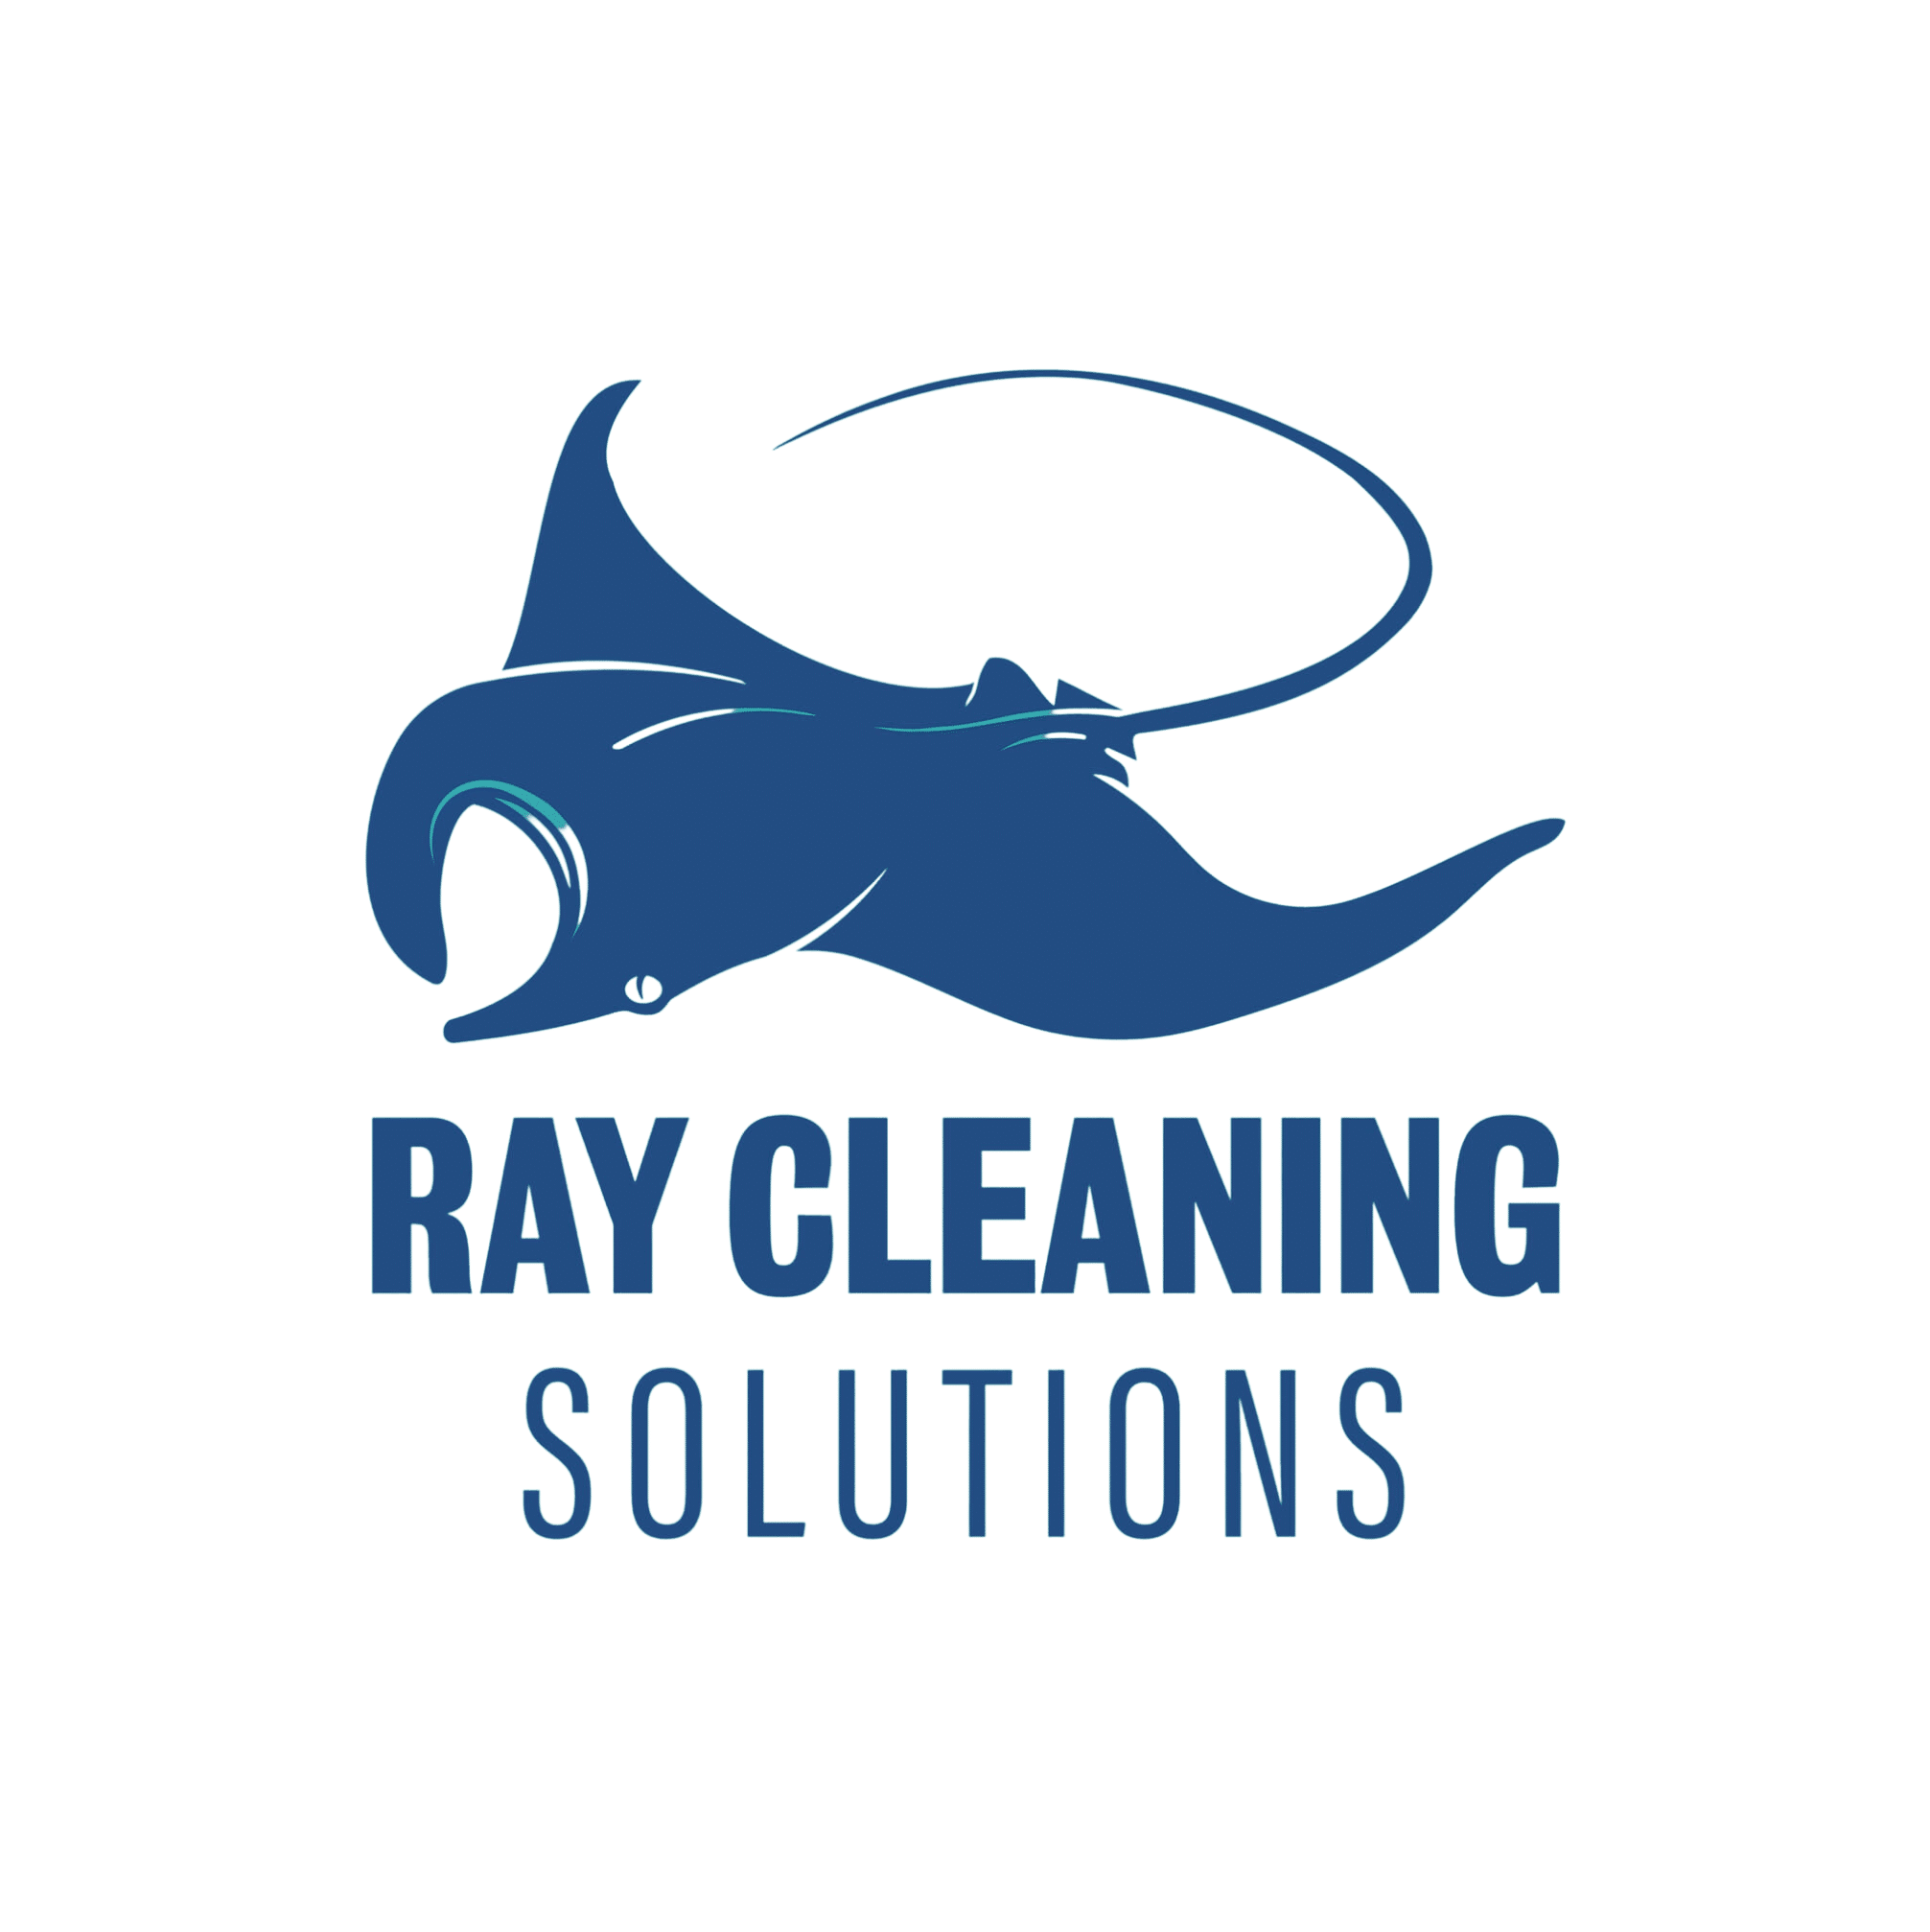 Ready Cleaning Services LV